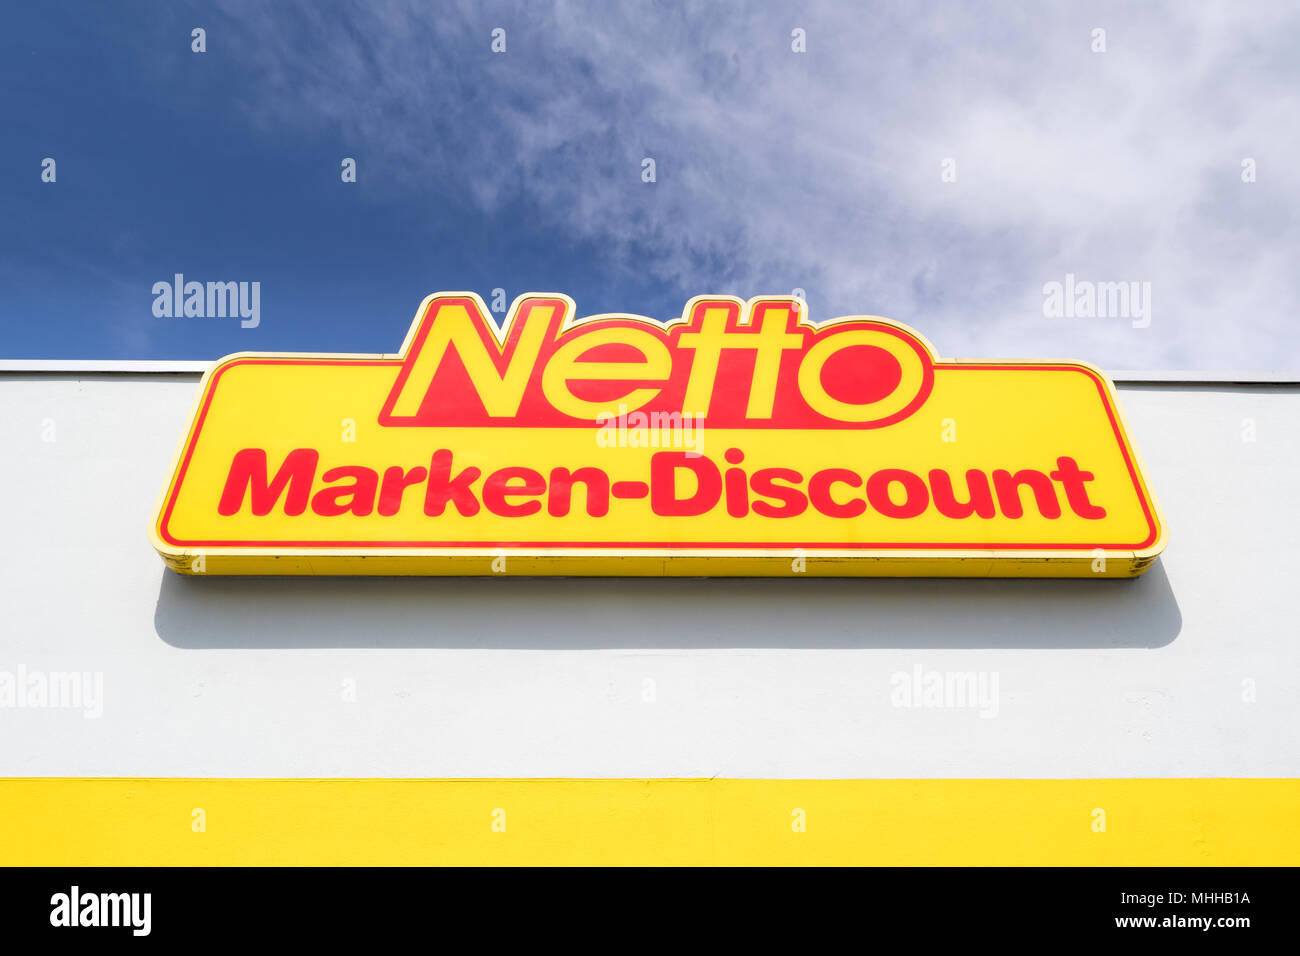 Netto Marken-Discount sign at branch. Netto is a German discount supermarket chain owned by Edeka Group. Stock Photo